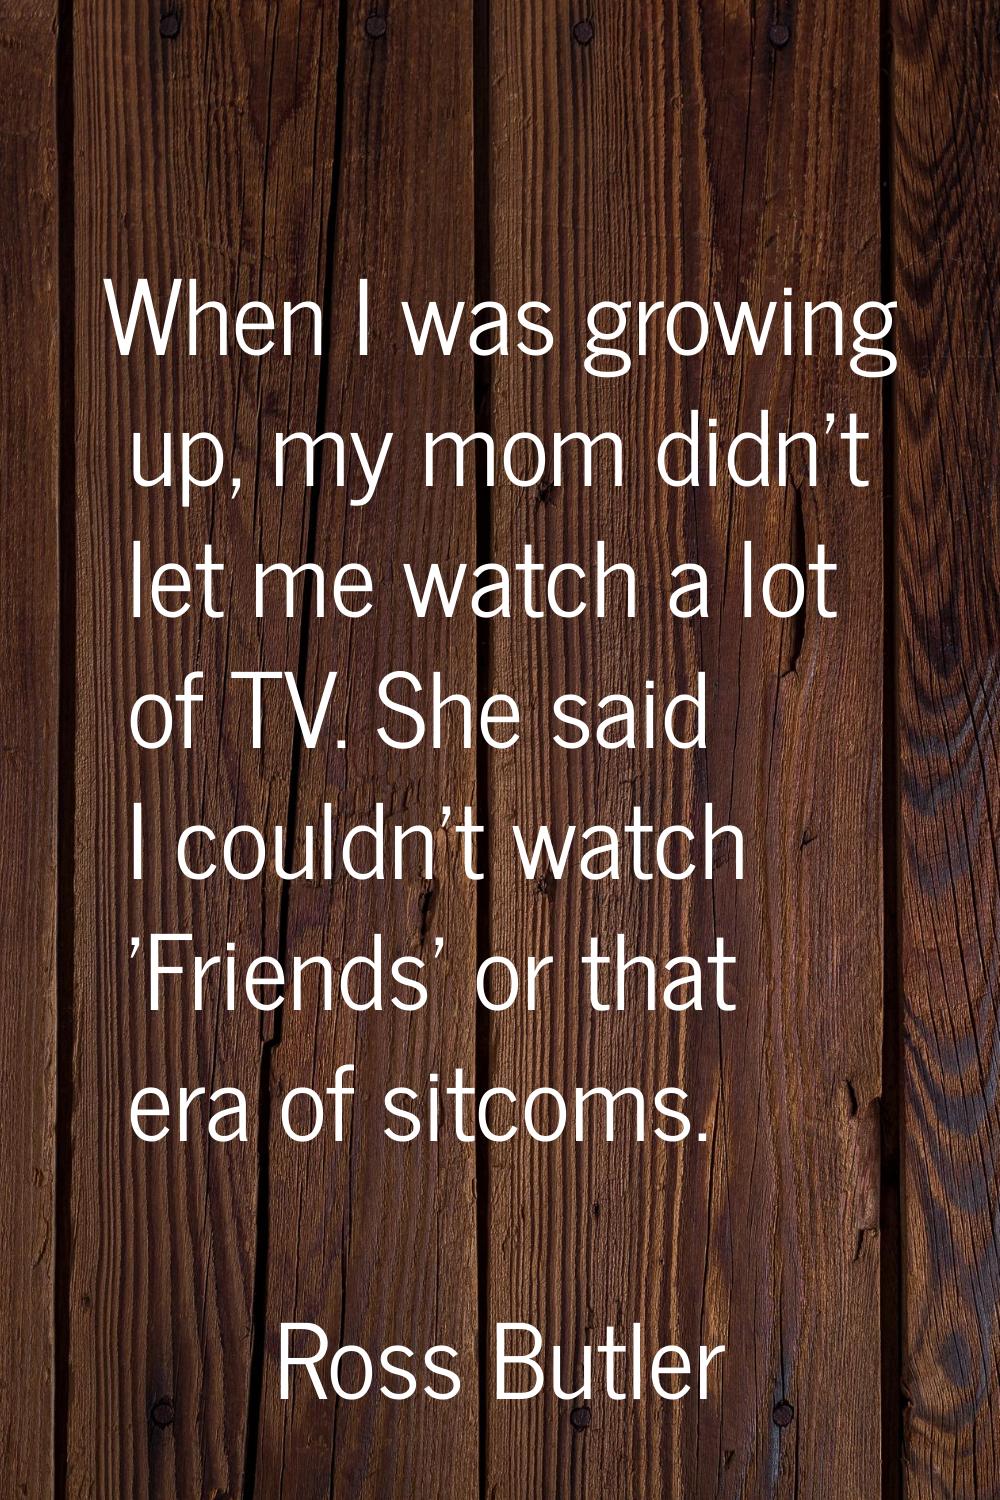 When I was growing up, my mom didn't let me watch a lot of TV. She said I couldn't watch 'Friends' 